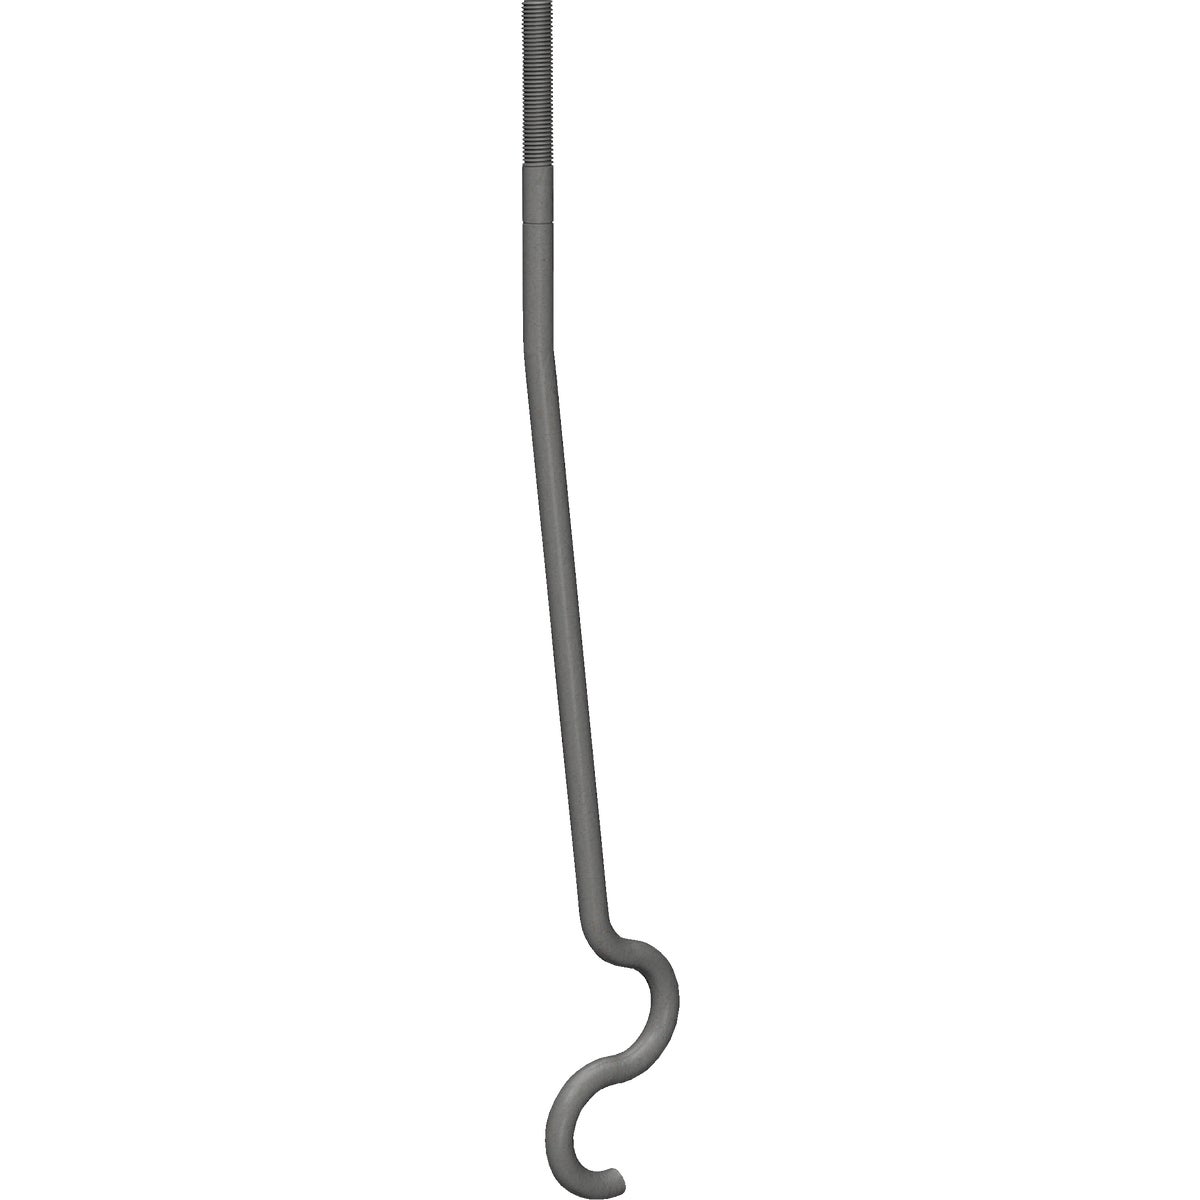 Simpson Strong-Tie 7/8 In. x 34-7/8 In. Anchor Bolt